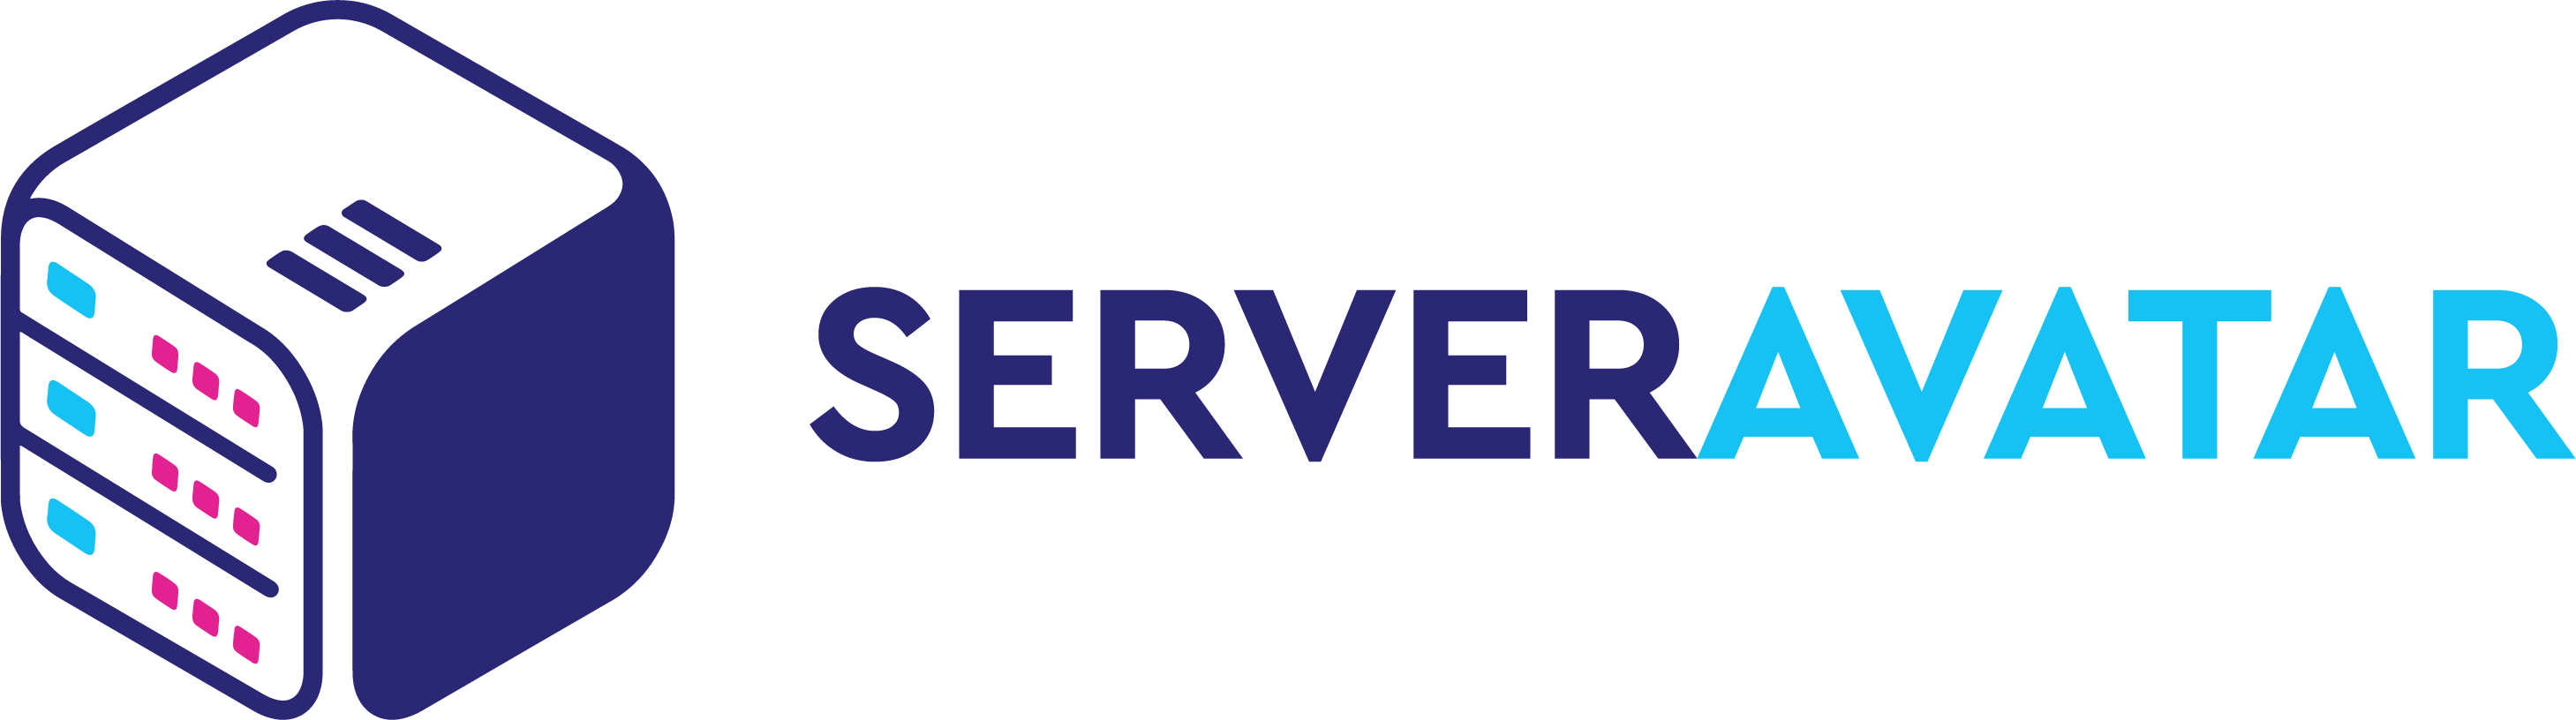 Host Super Fast PHP/WordPress sites on your servers in minutes - ServerAvatar